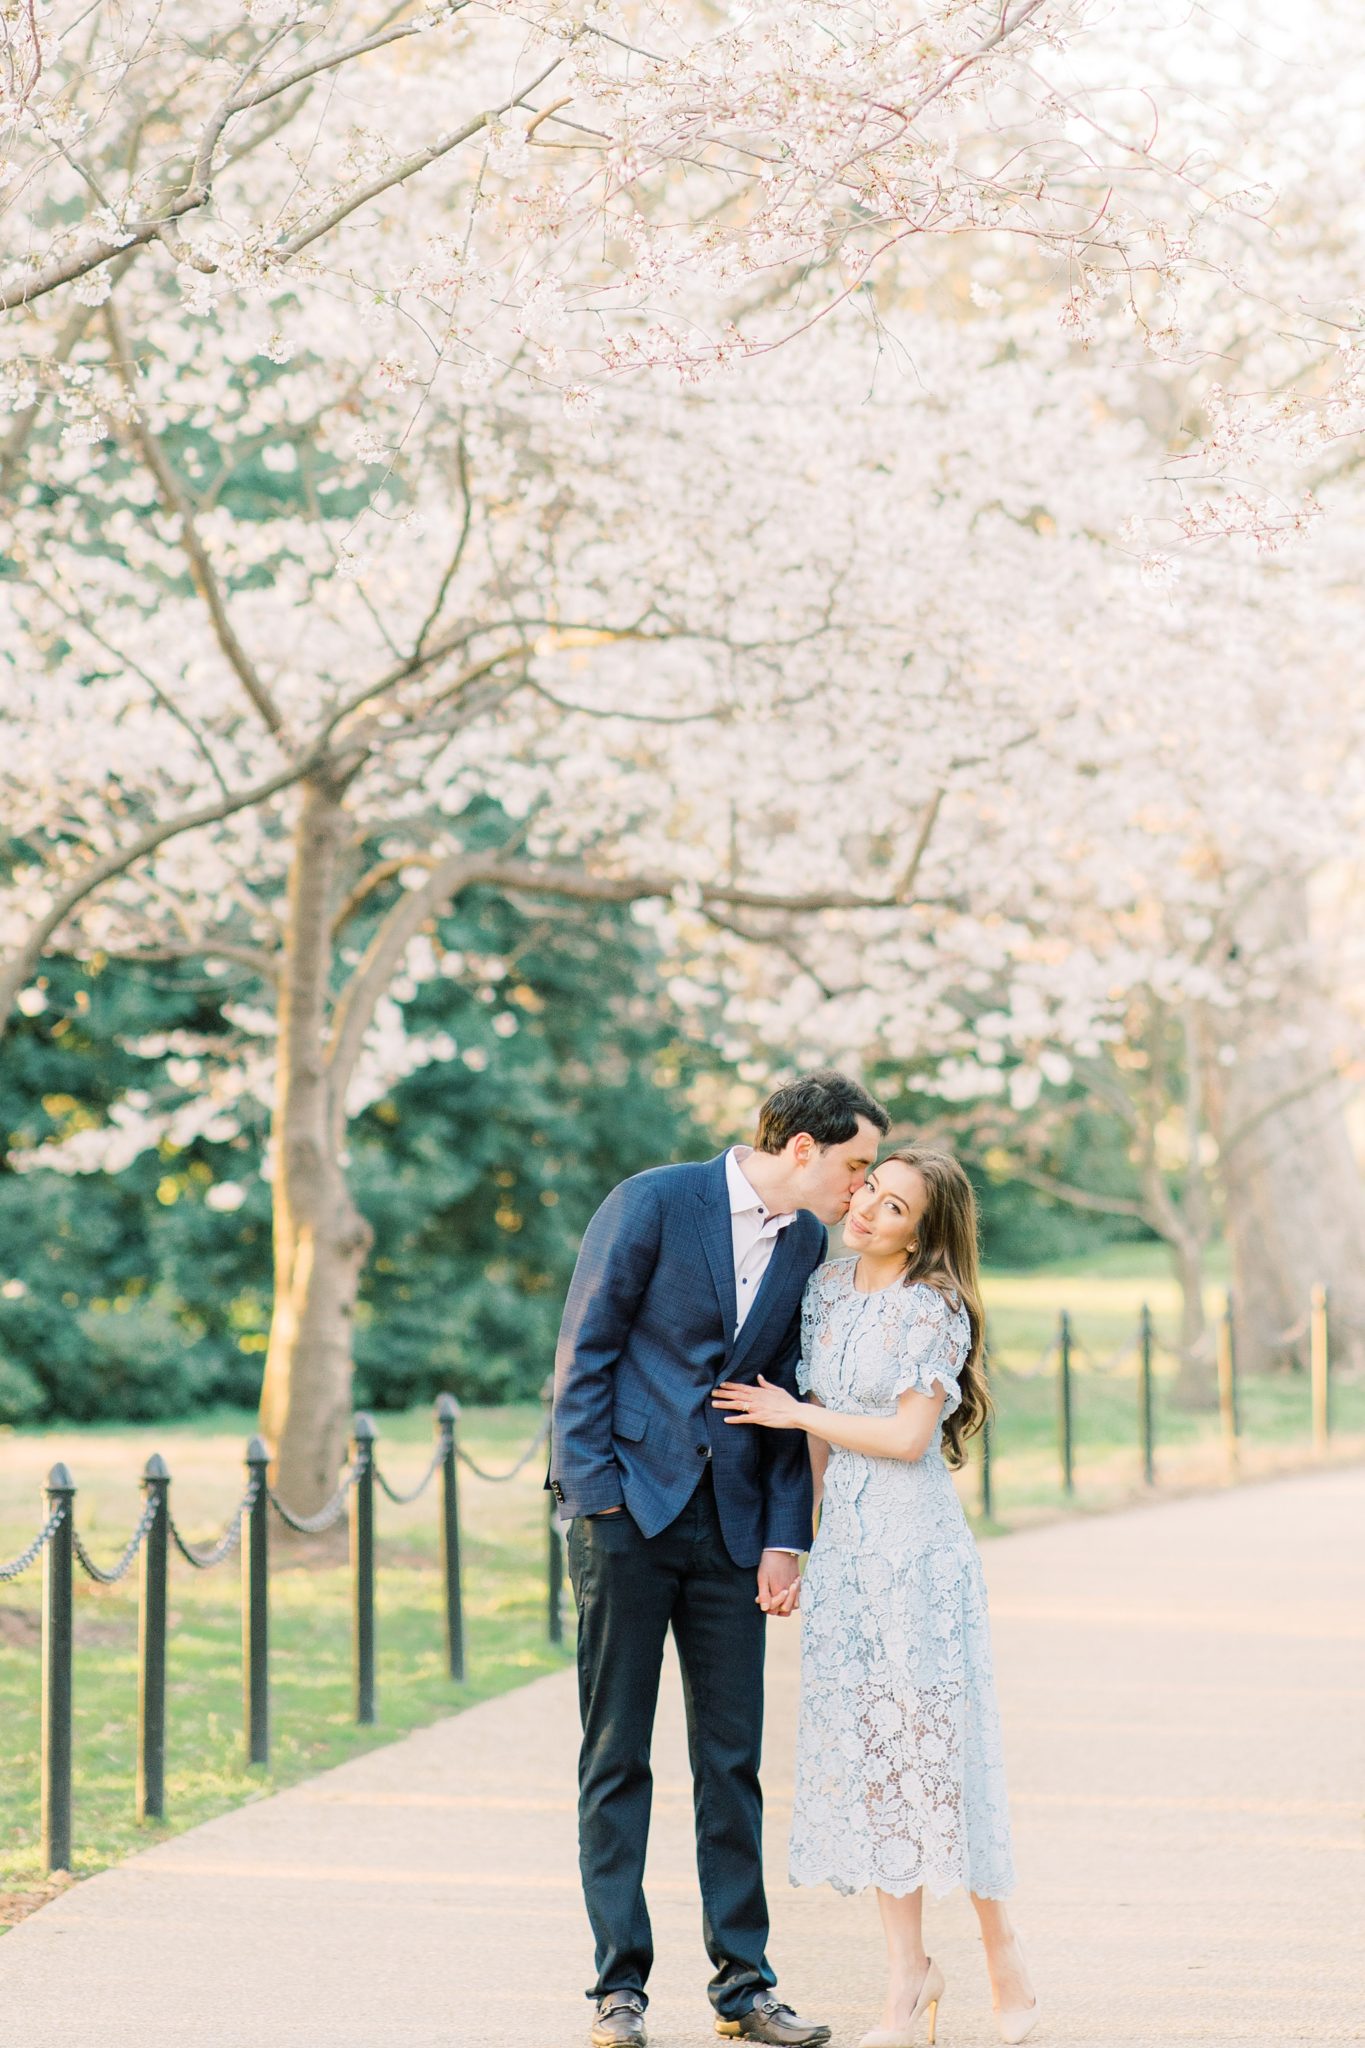 We were hoping to capture Valeria & John's engagement session during peak bloom, but it was worth it to squeeze their session in before all the craziness picked up over the past week! Luckily we were still able to capture a bit of that iconic beauty from some early blossoms! See it all over on the blog! #linkinprofile